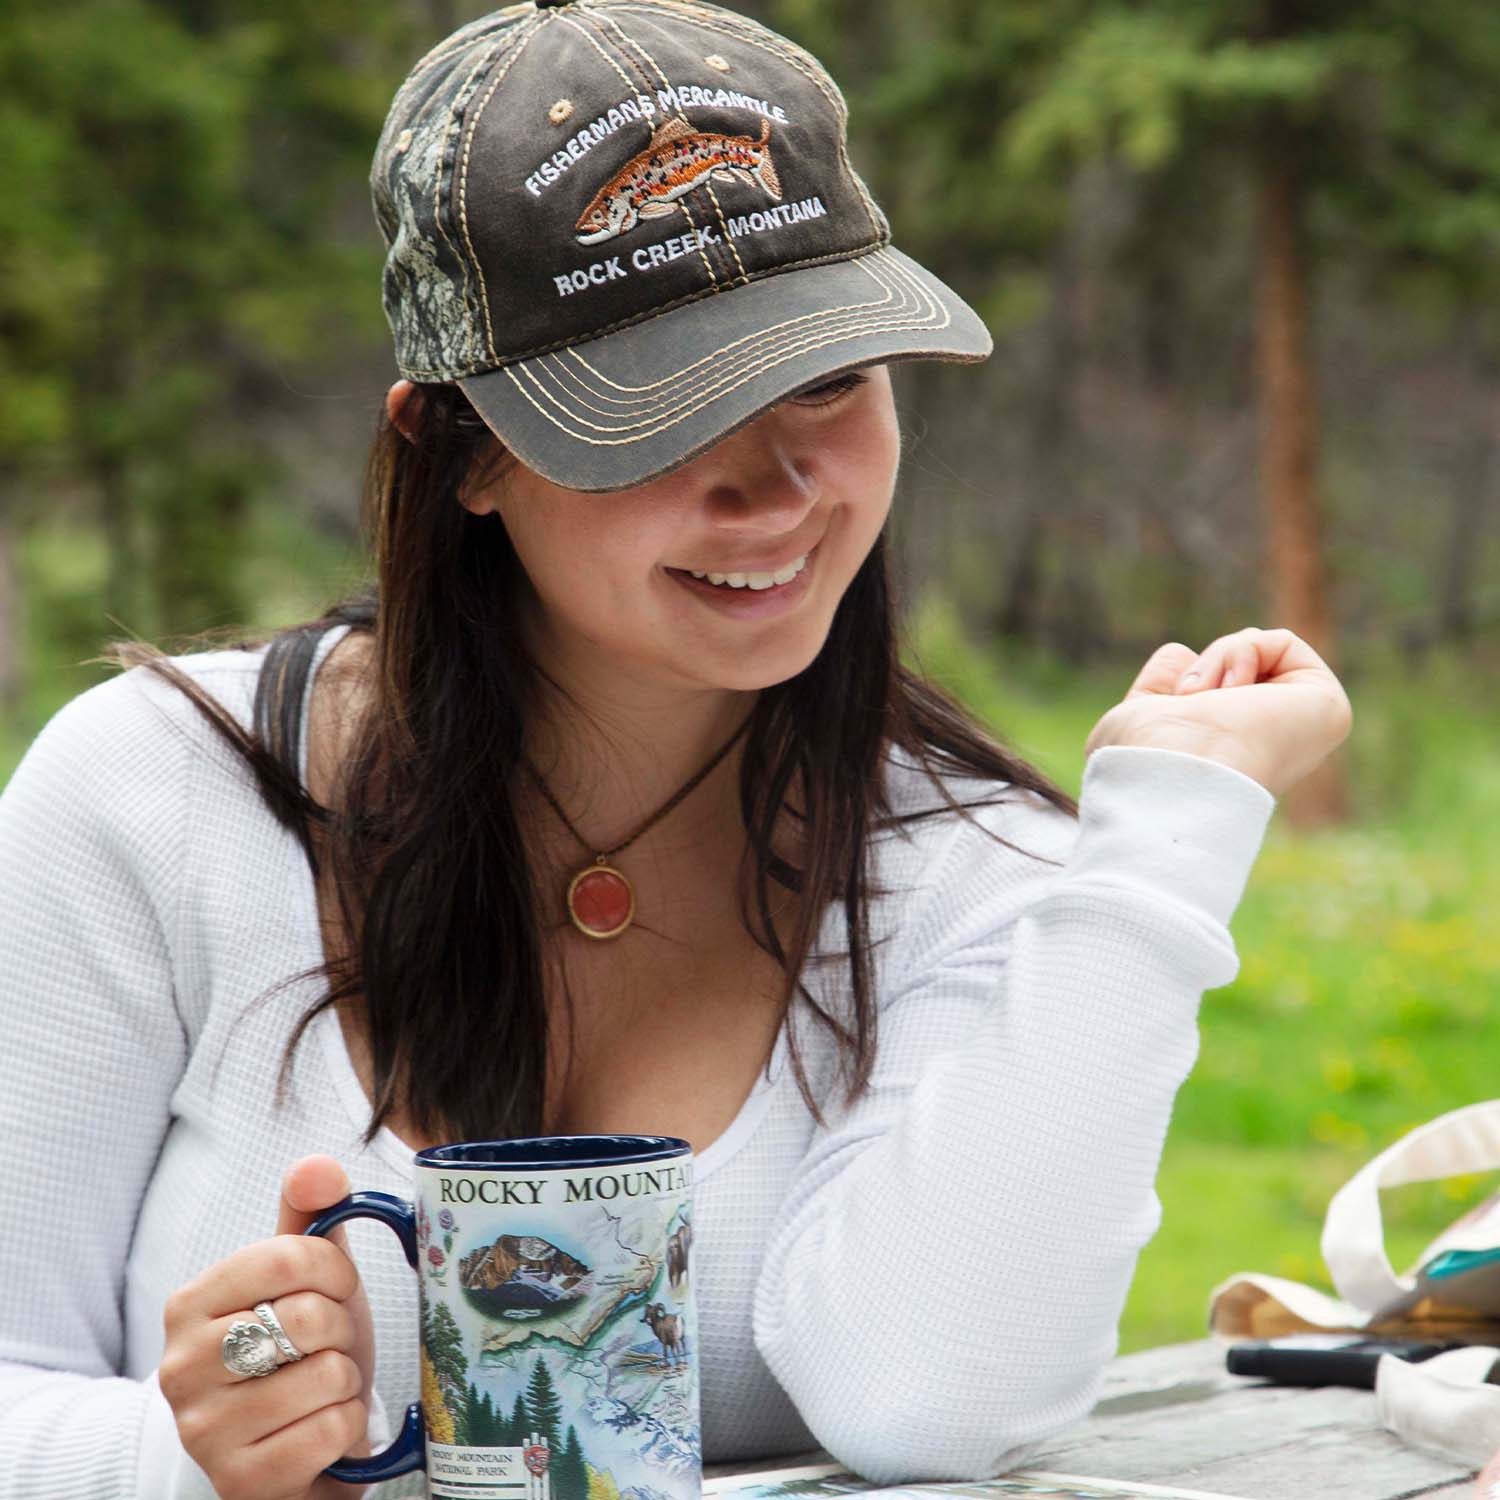 A woman holding a Blue 16 oz Rocky Mountain National Park Map Ceramic Mug. The map features illustrations of places like Trail Ridge Road, Mount Ganby, Estes Park, and the Alpine Visitor Center. Flora and fauna include bobcats, snowshoe hares, Indian paintbrushes, and wild roses. 